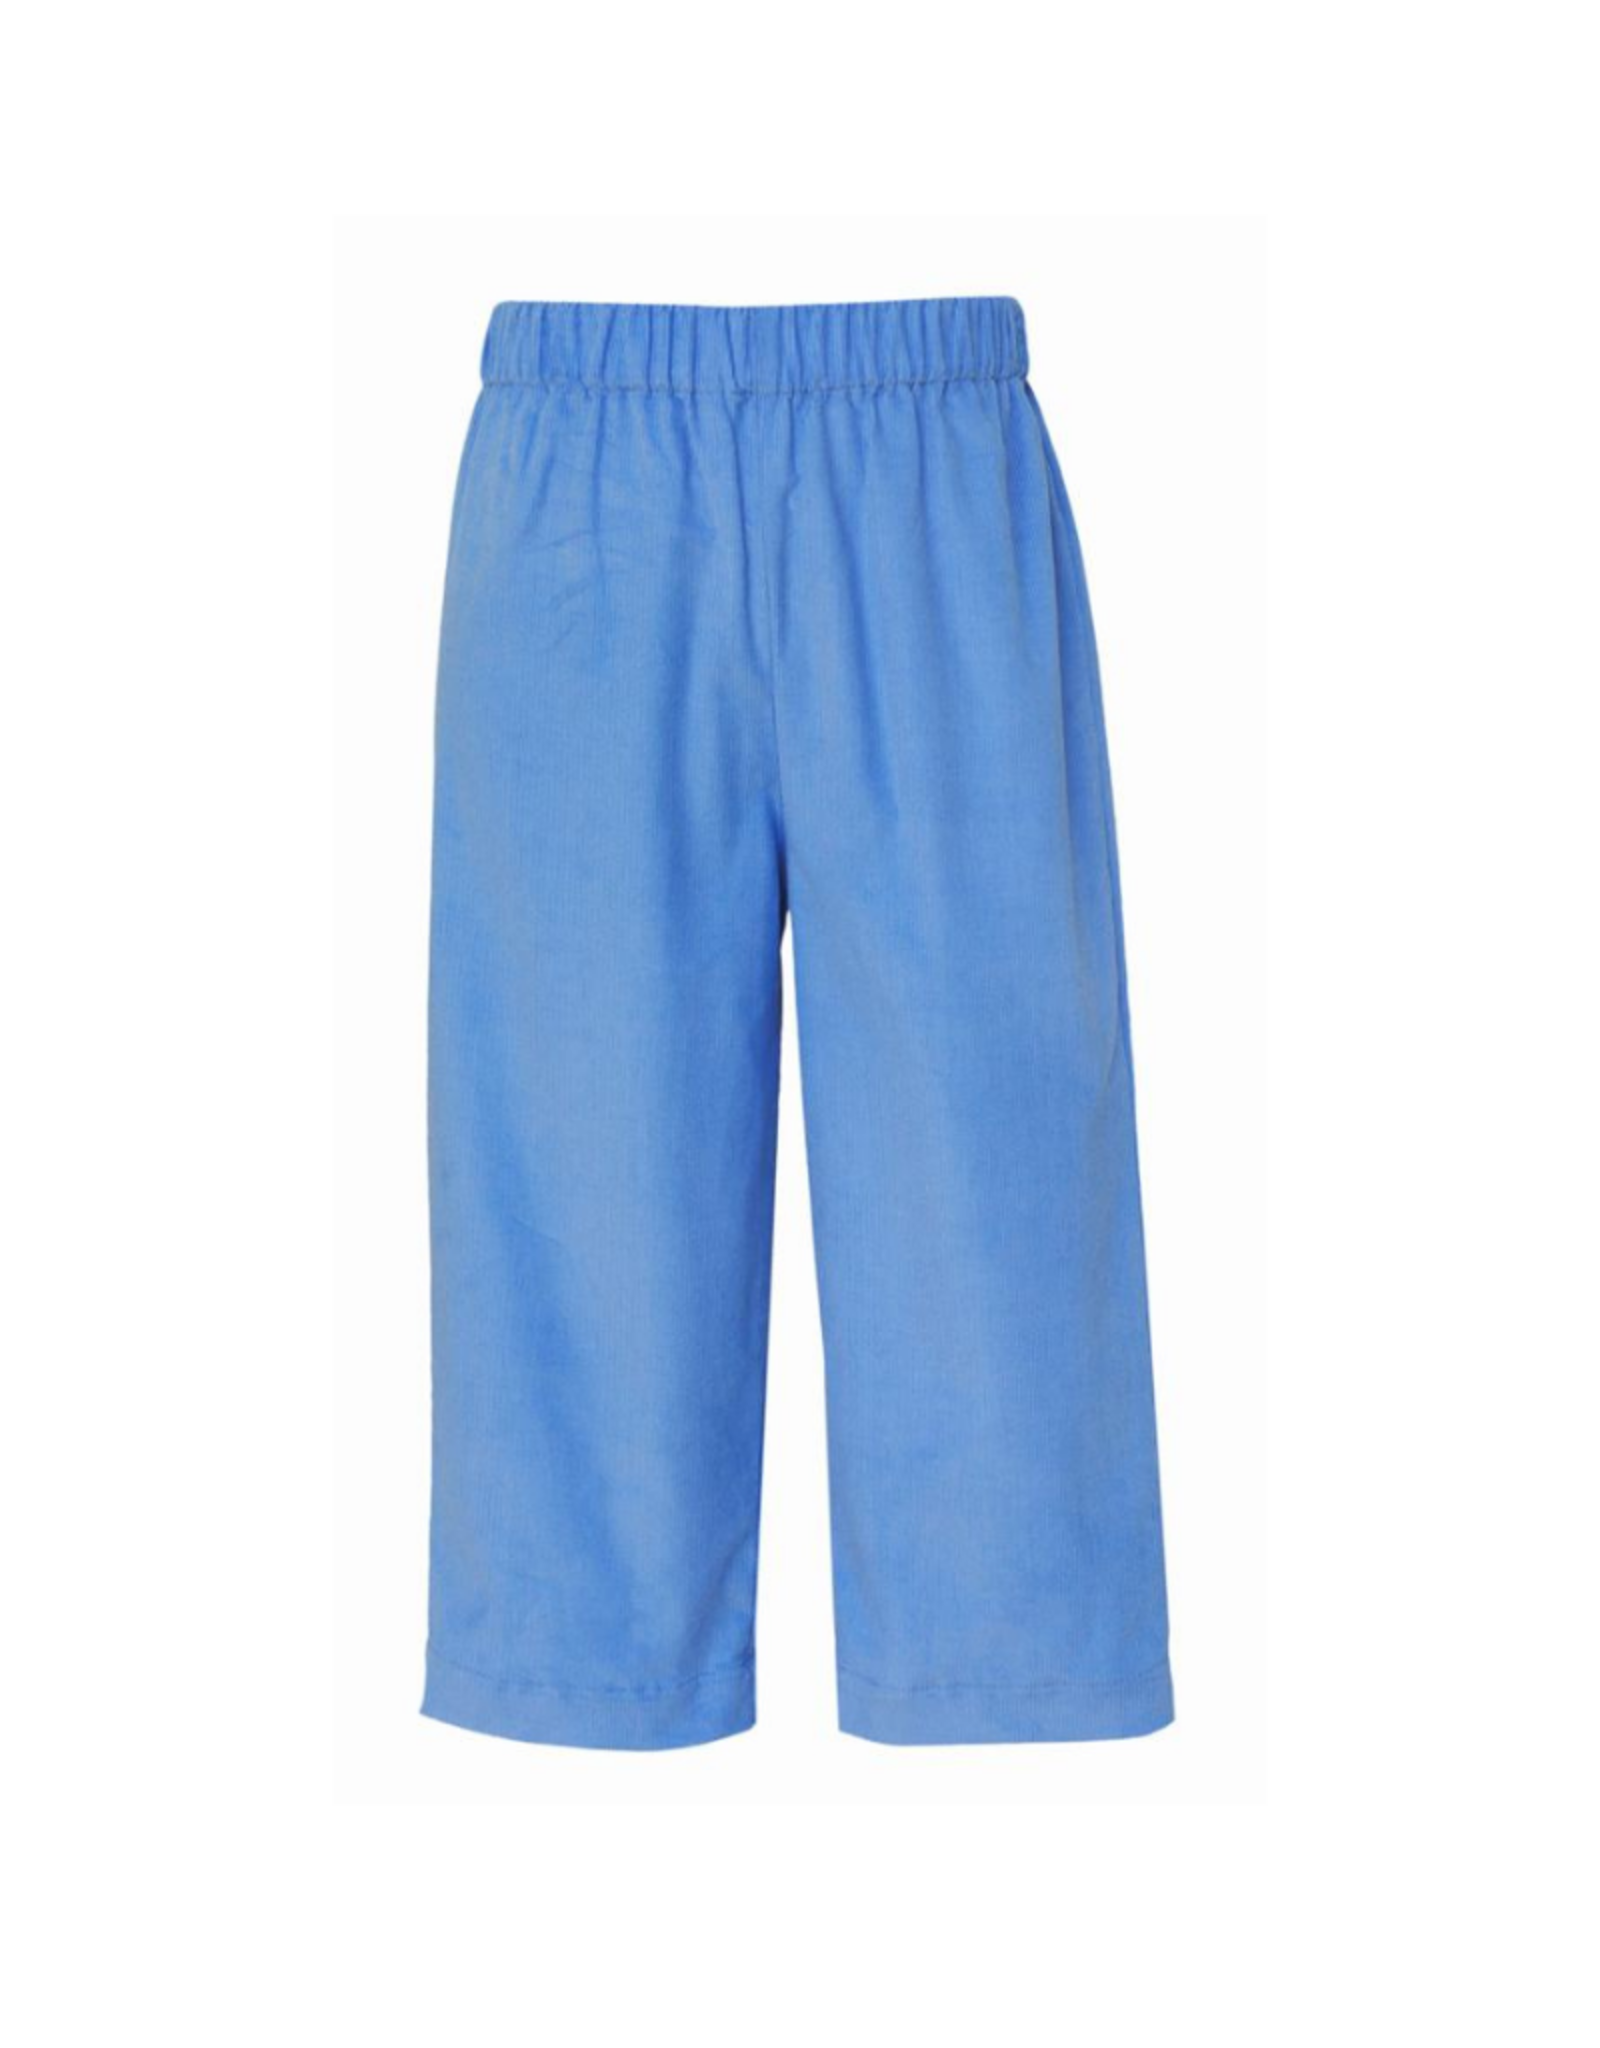 Claire and Charlie Periwinkle Corduroy Boy's Pants